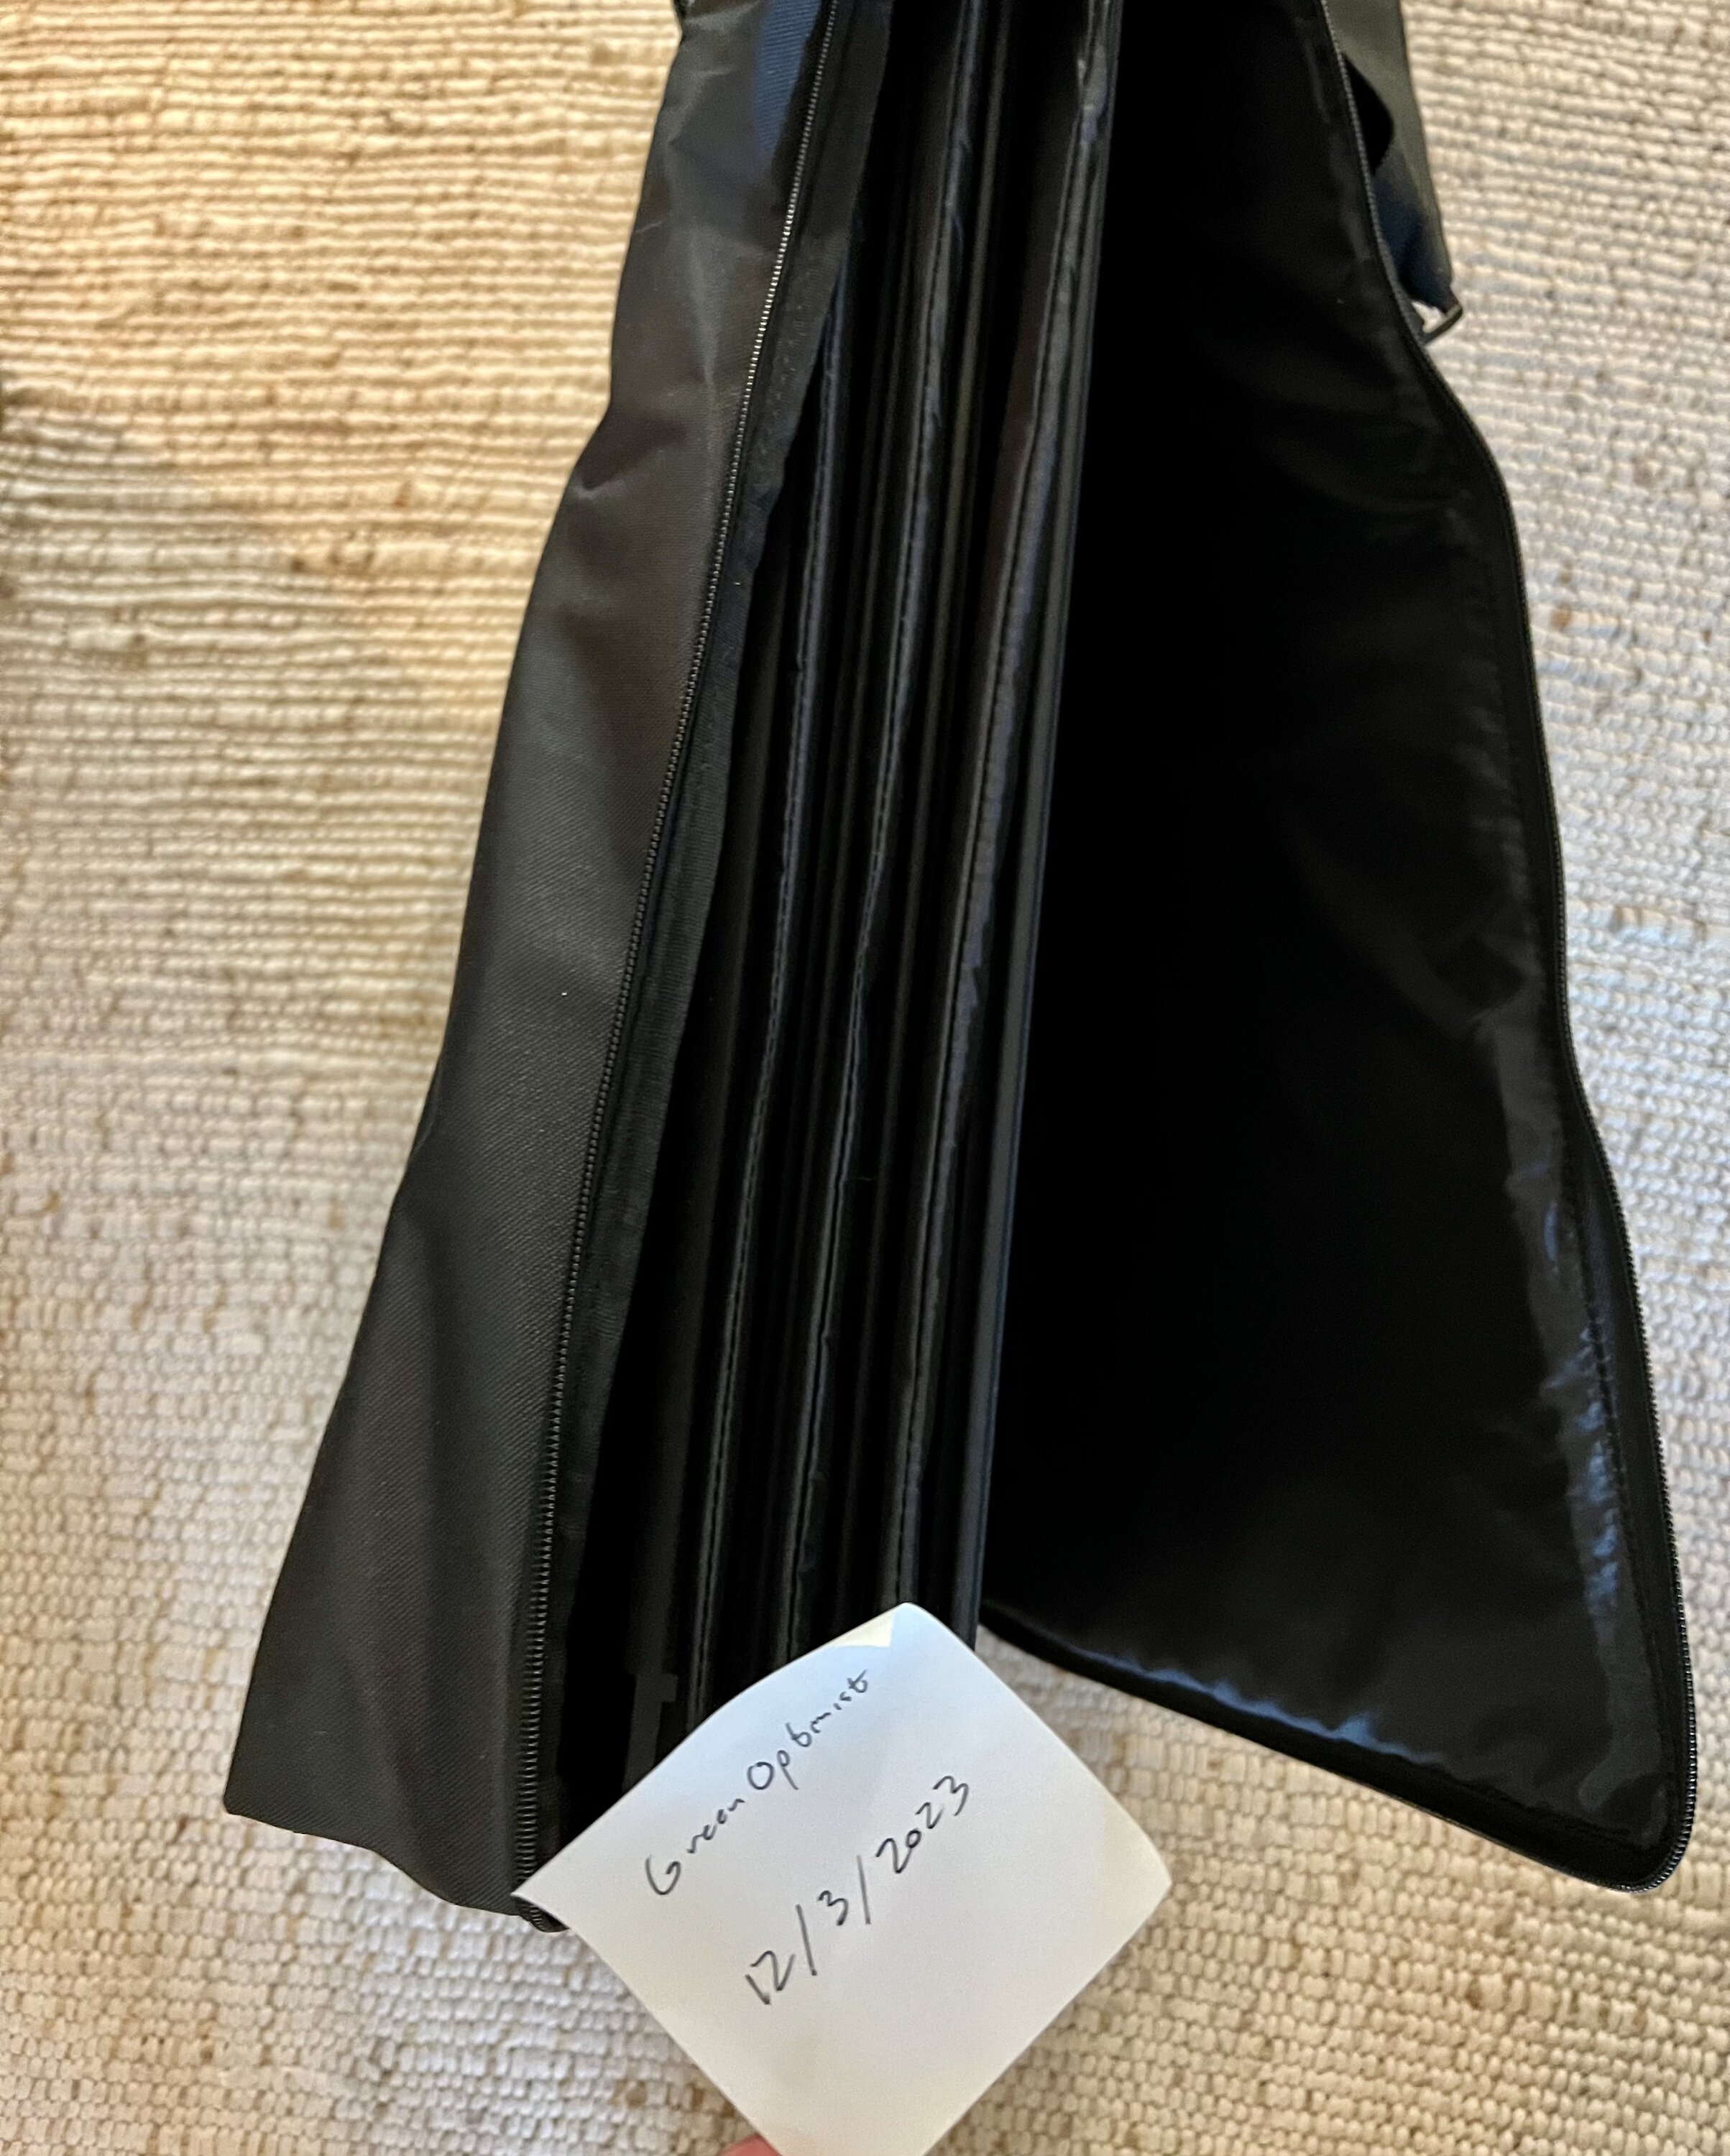 Rivian R1T R1S FS - Manual Tonneau Cover - Brand New - $1,200 Bag with Tonneau and name